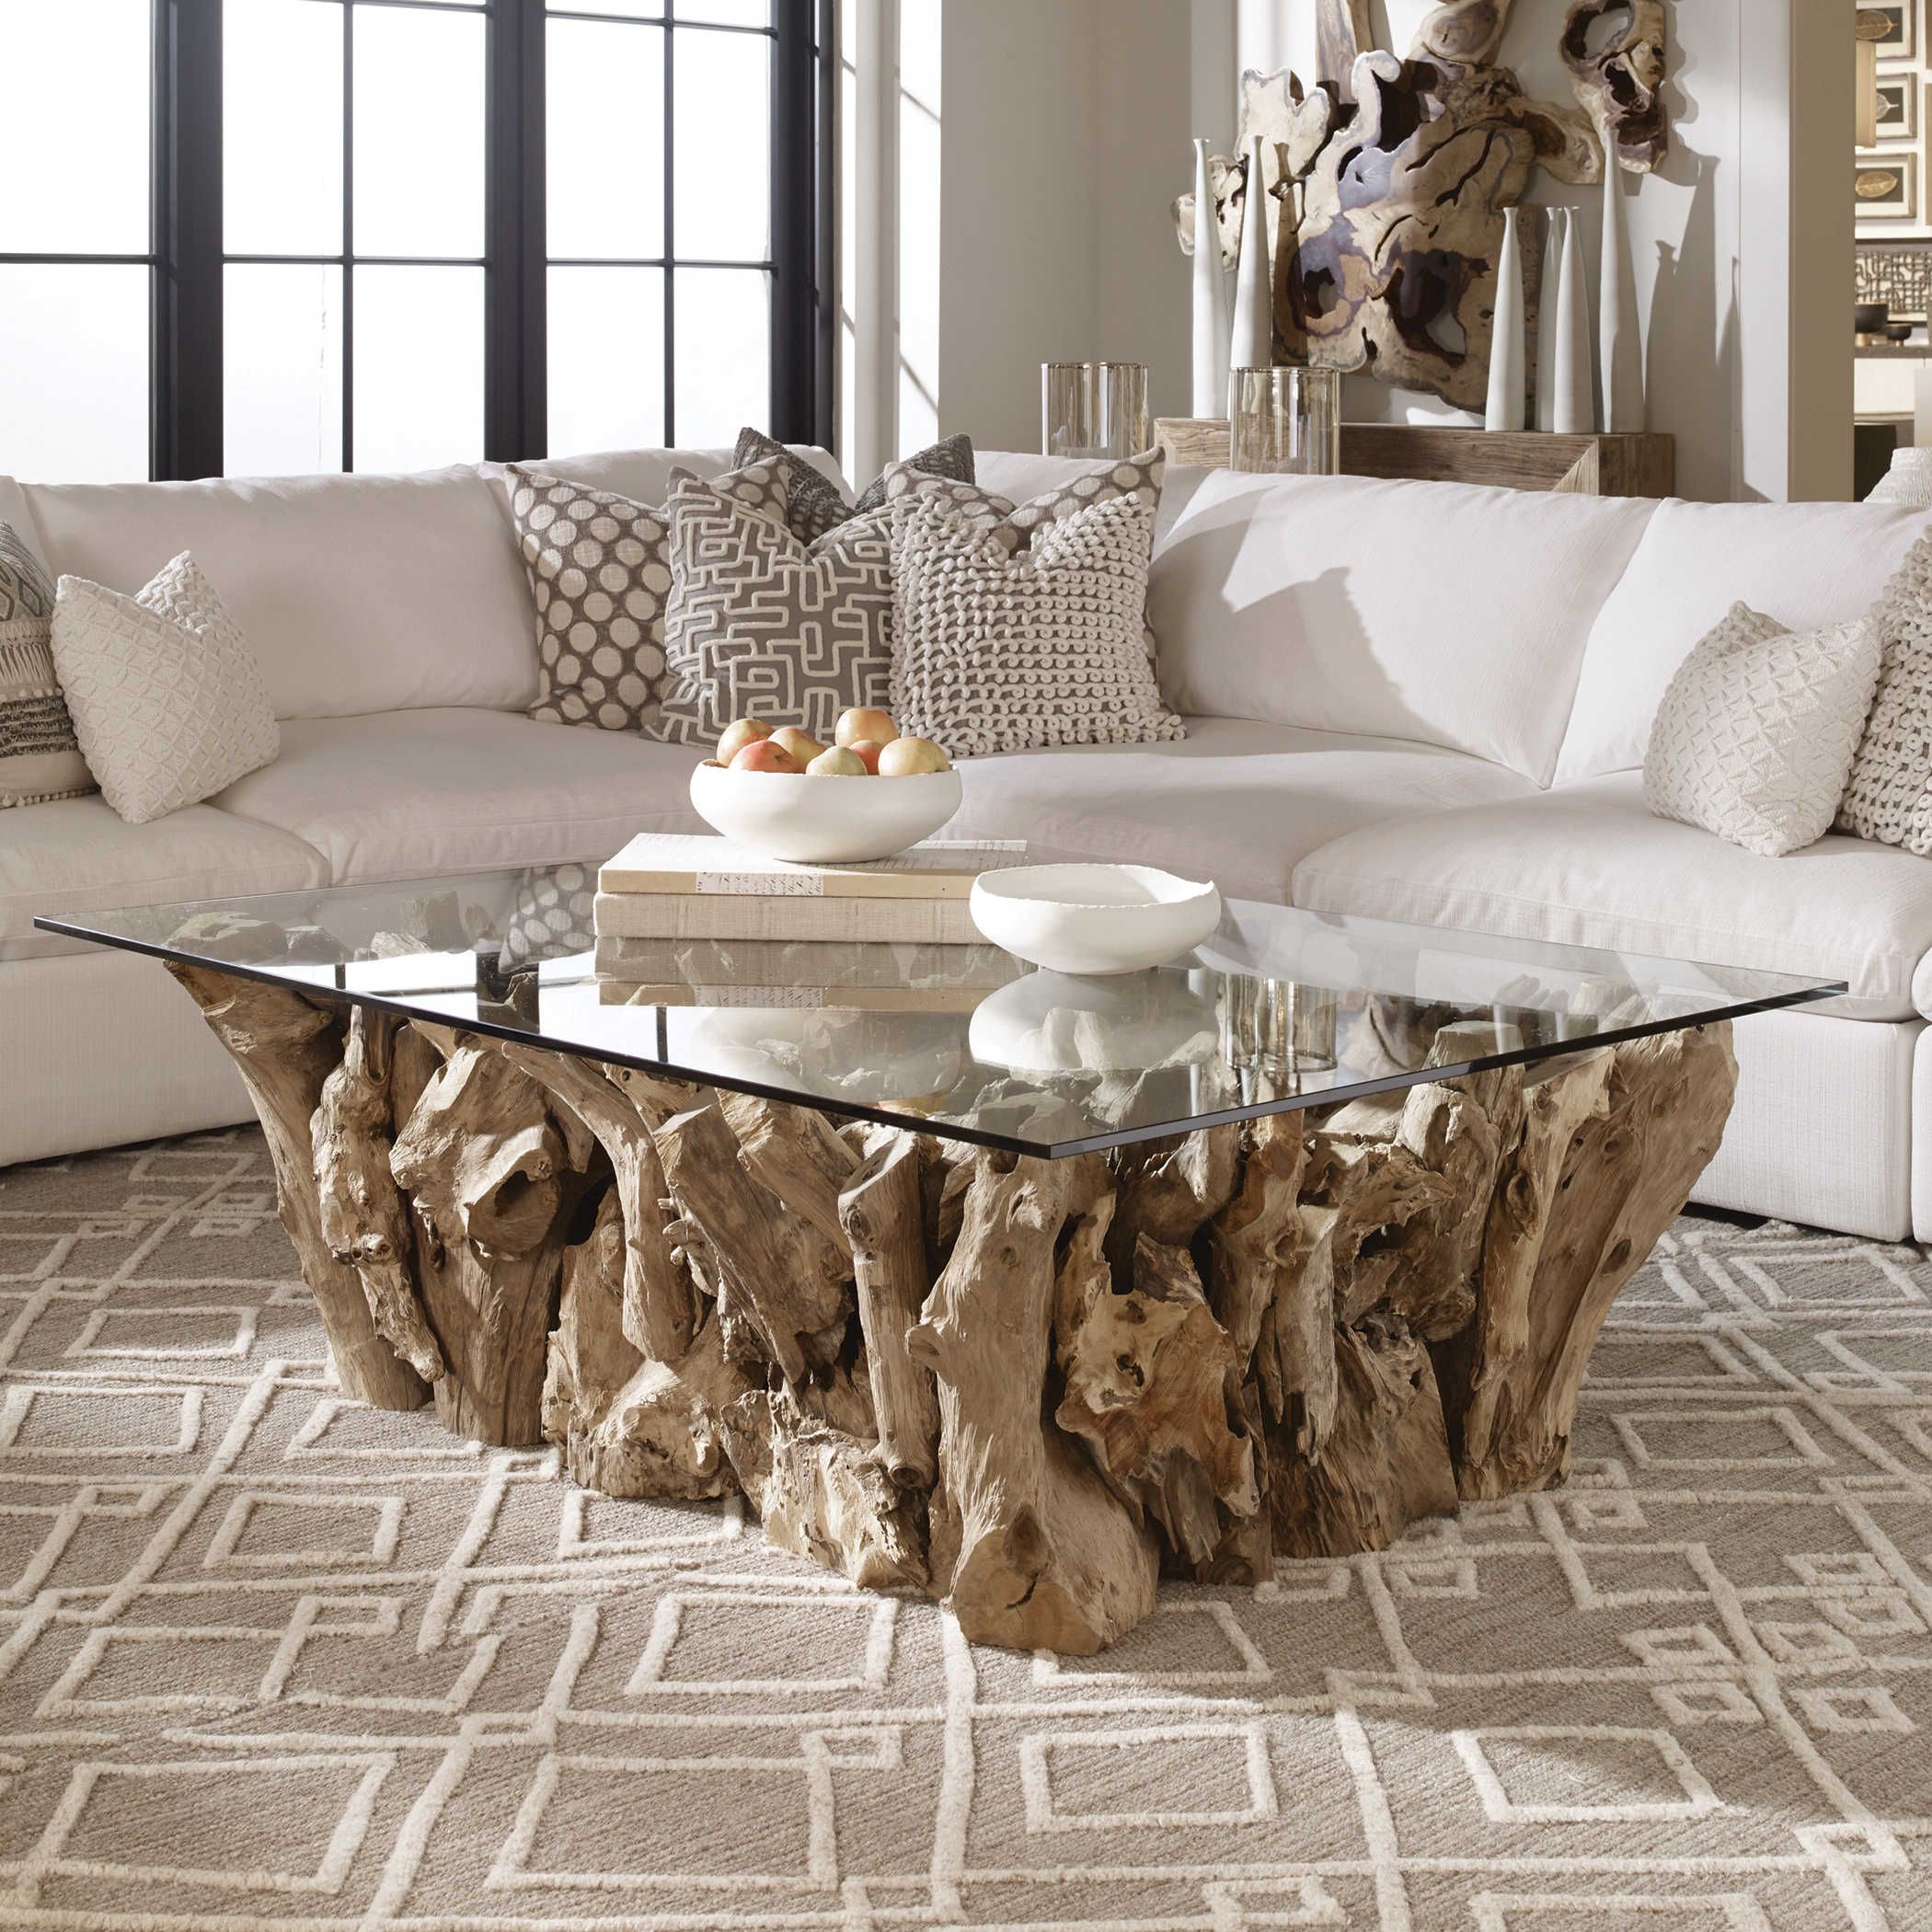 Teak Root Coffee Table, 2 Cartons | Uttermost Intended For Teak Coffee Tables (View 9 of 20)